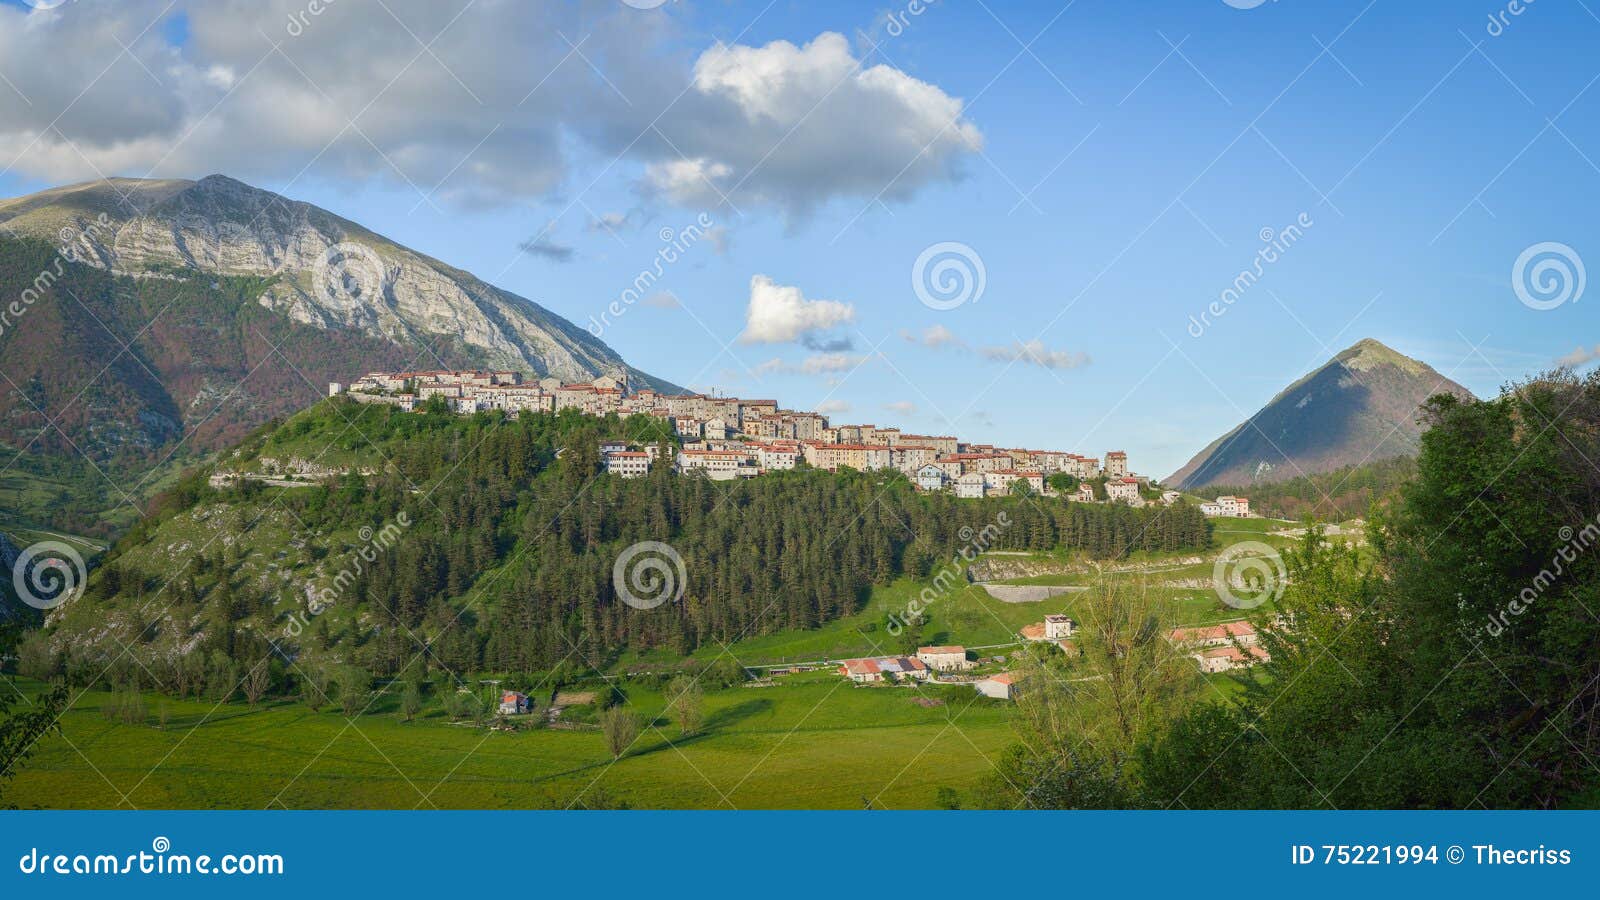 the village of opi at abruzzo national park in italy